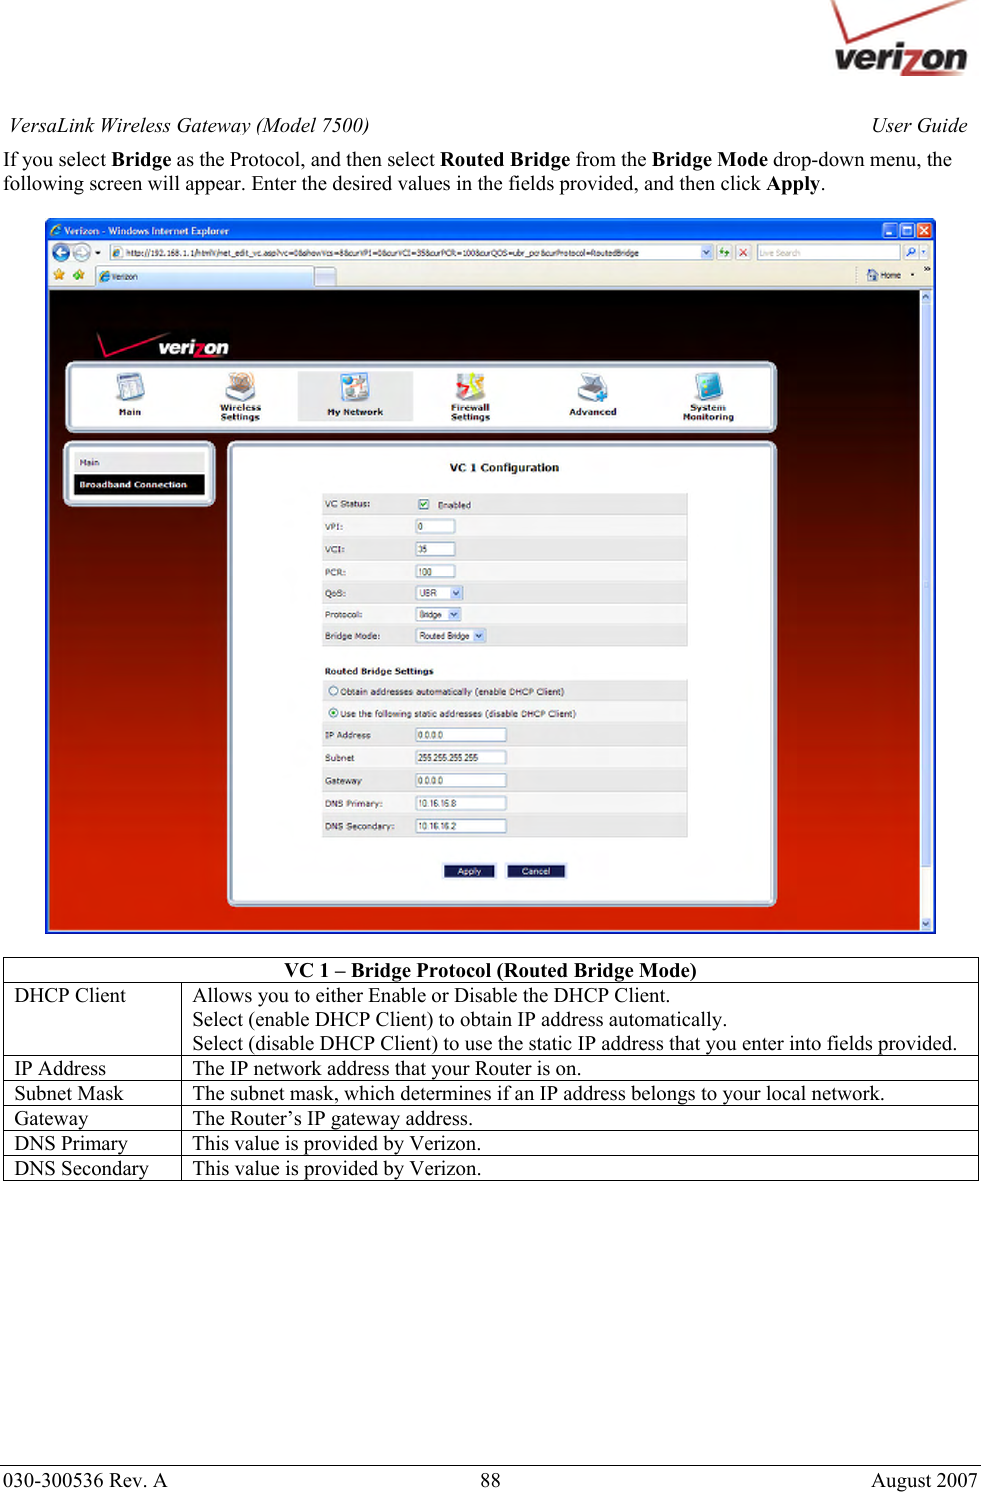       030-300536 Rev. A  88       August 2007 User GuideVersaLink Wireless Gateway (Model 7500)If you select Bridge as the Protocol, and then select Routed Bridge from the Bridge Mode drop-down menu, the following screen will appear. Enter the desired values in the fields provided, and then click Apply.     VC 1 – Bridge Protocol (Routed Bridge Mode) DHCP Client  Allows you to either Enable or Disable the DHCP Client. Select (enable DHCP Client) to obtain IP address automatically. Select (disable DHCP Client) to use the static IP address that you enter into fields provided. IP Address  The IP network address that your Router is on. Subnet Mask  The subnet mask, which determines if an IP address belongs to your local network. Gateway  The Router’s IP gateway address. DNS Primary  This value is provided by Verizon. DNS Secondary  This value is provided by Verizon.            